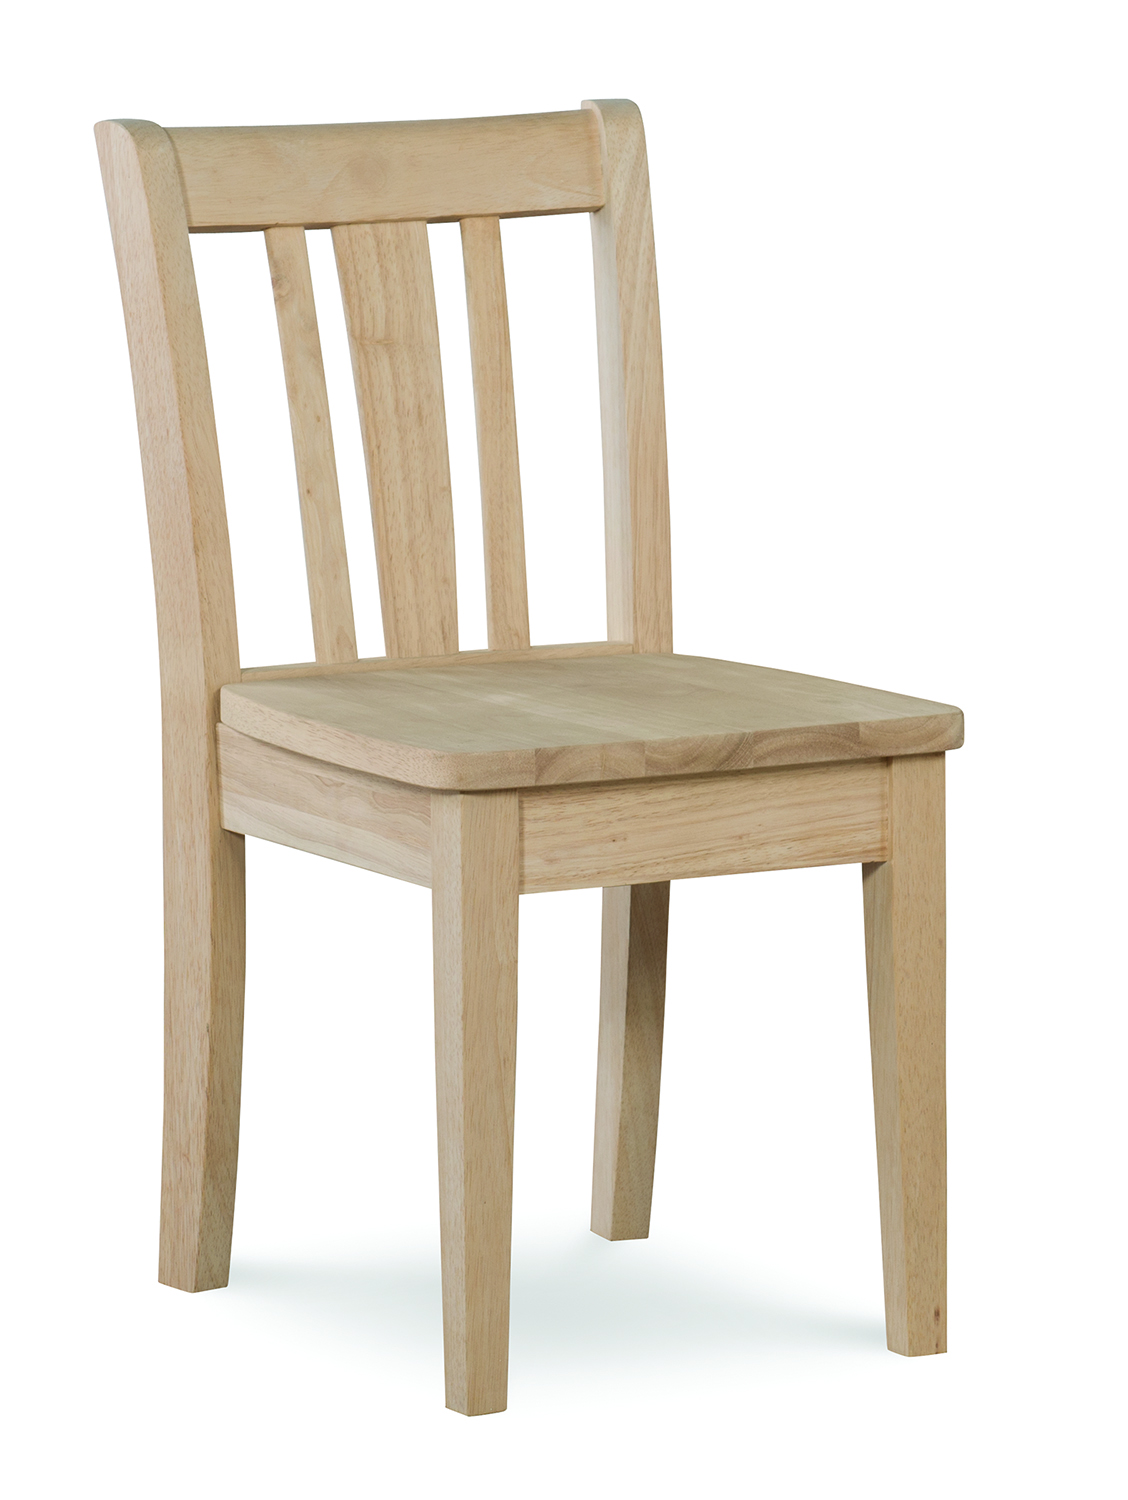 San Remo Childs Chair